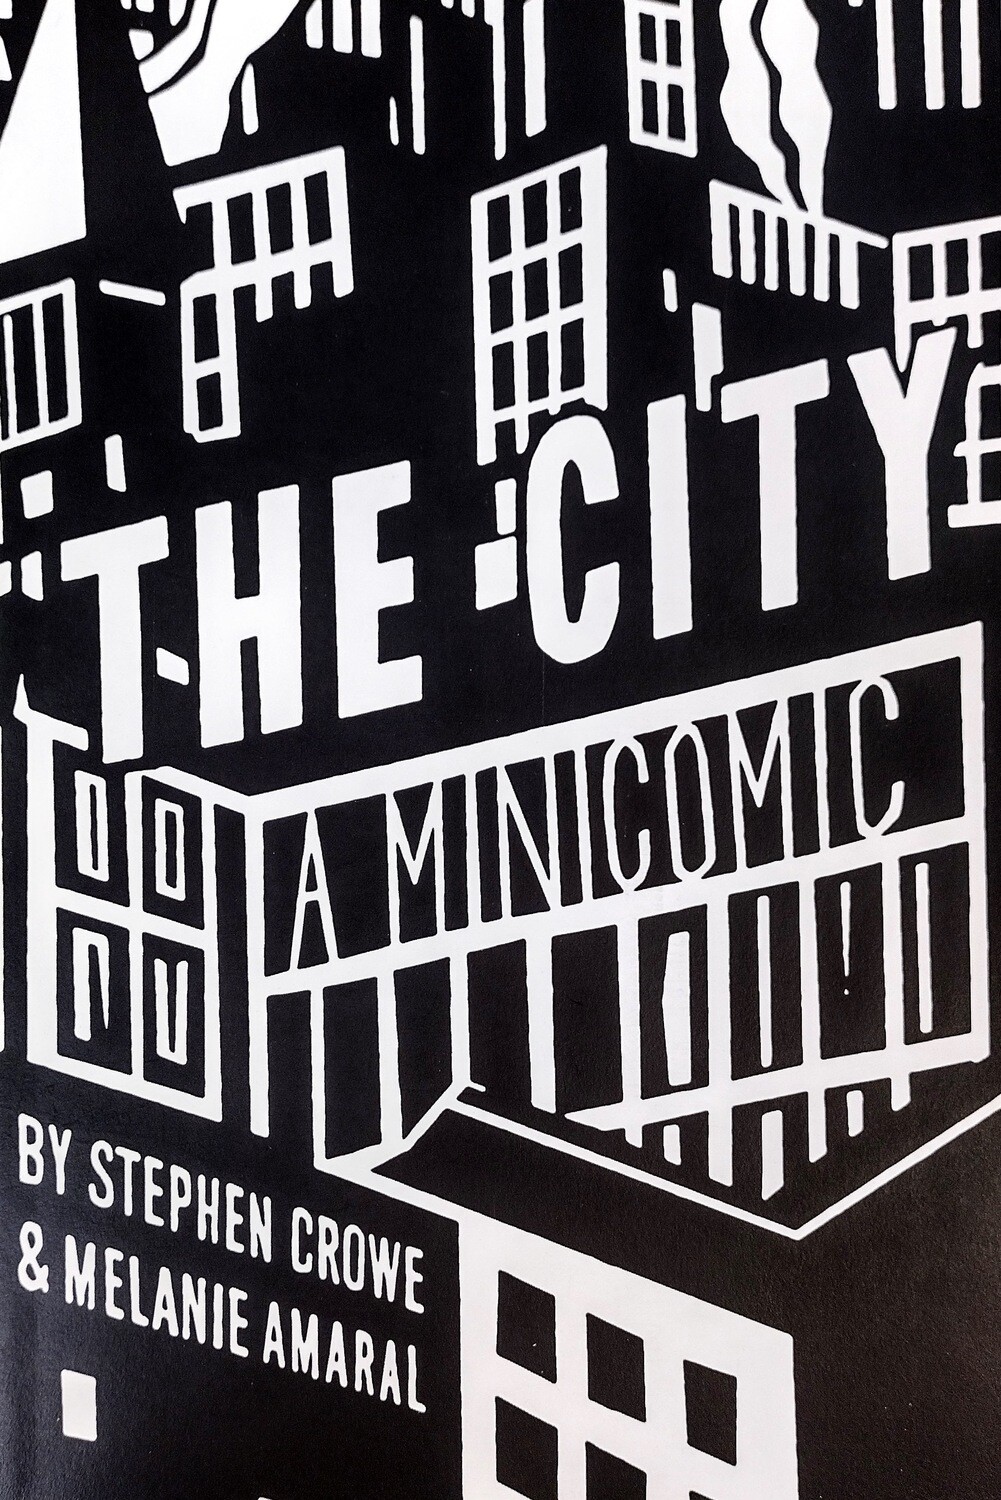 The City #1 - Comic by Stephen Crowe and Melanie Amaral